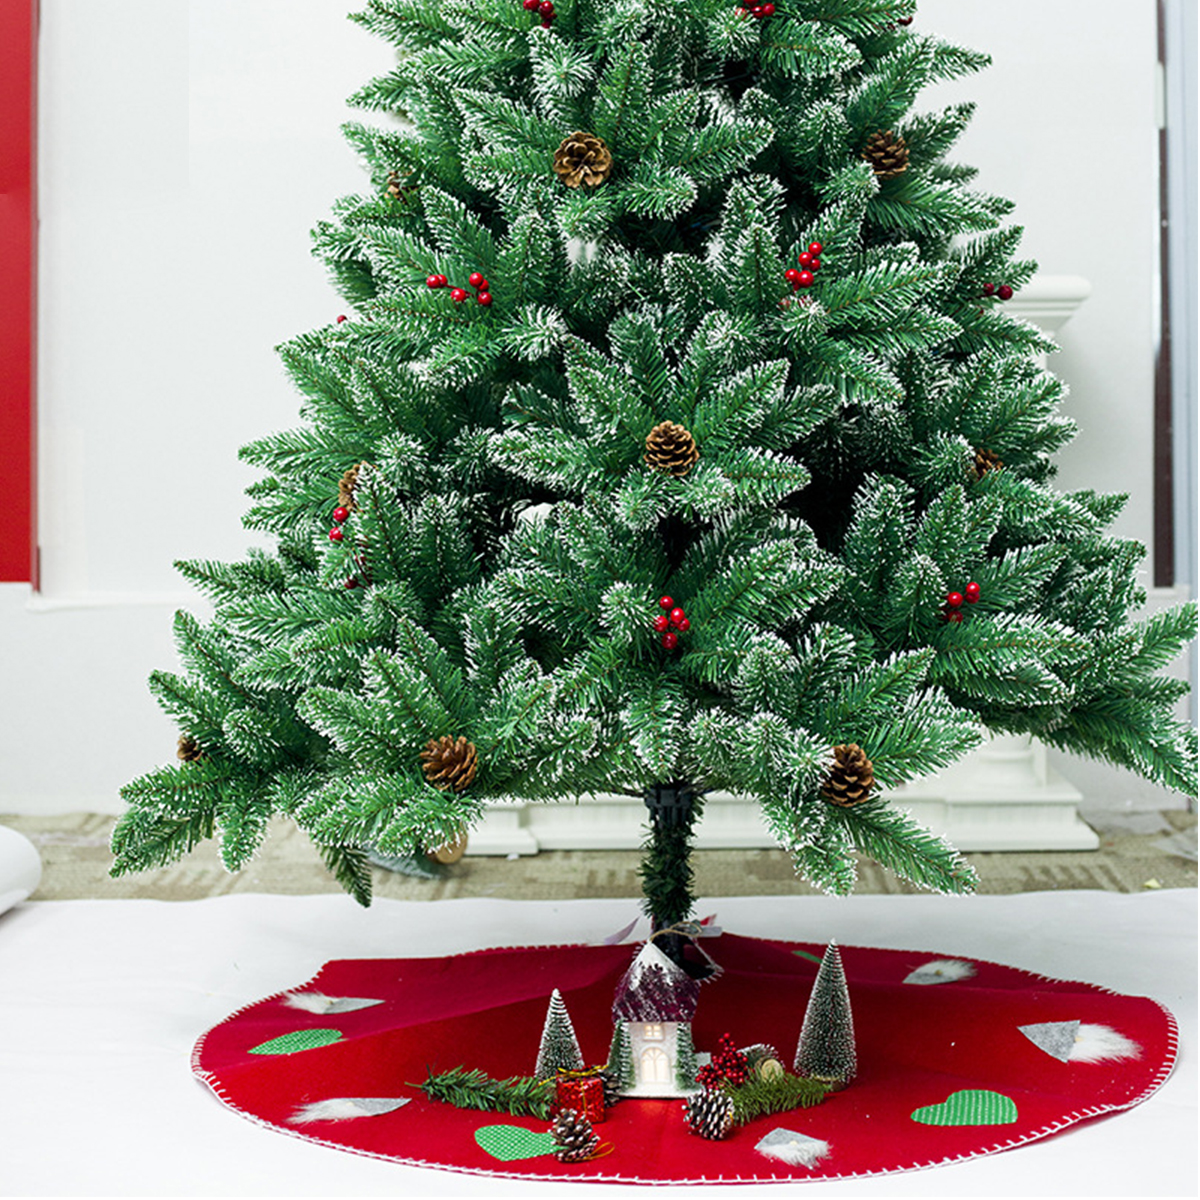 100cm-Red-Christmas-Tree-Skirt-Carpet-Party-Gift-Decor-Pad-Ornaments-Round-Mat-1376090